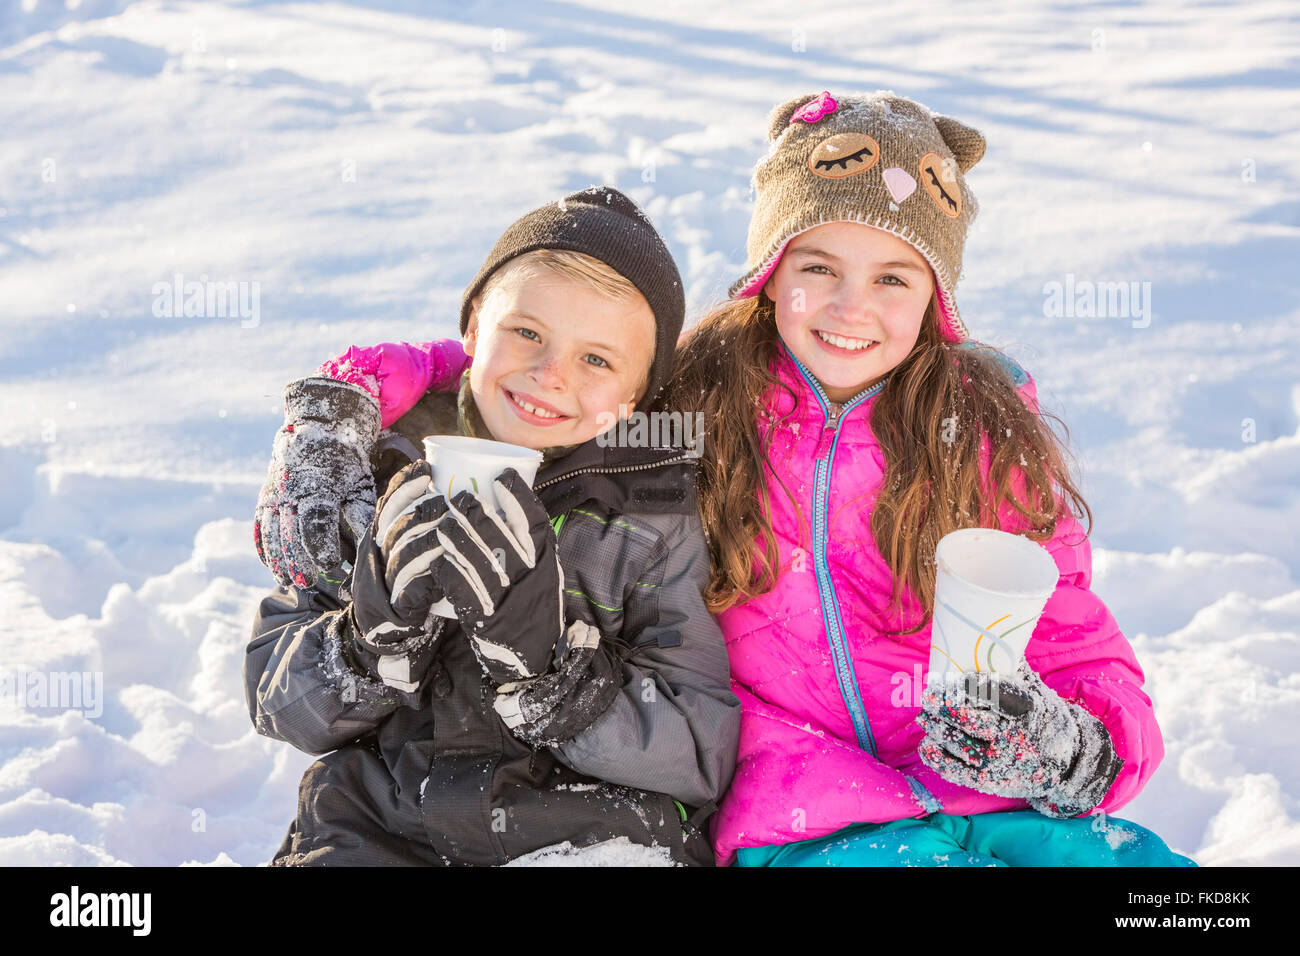 Boy (8-9) and girl (10-11) warming up drinking hot chocolate Stock Photo